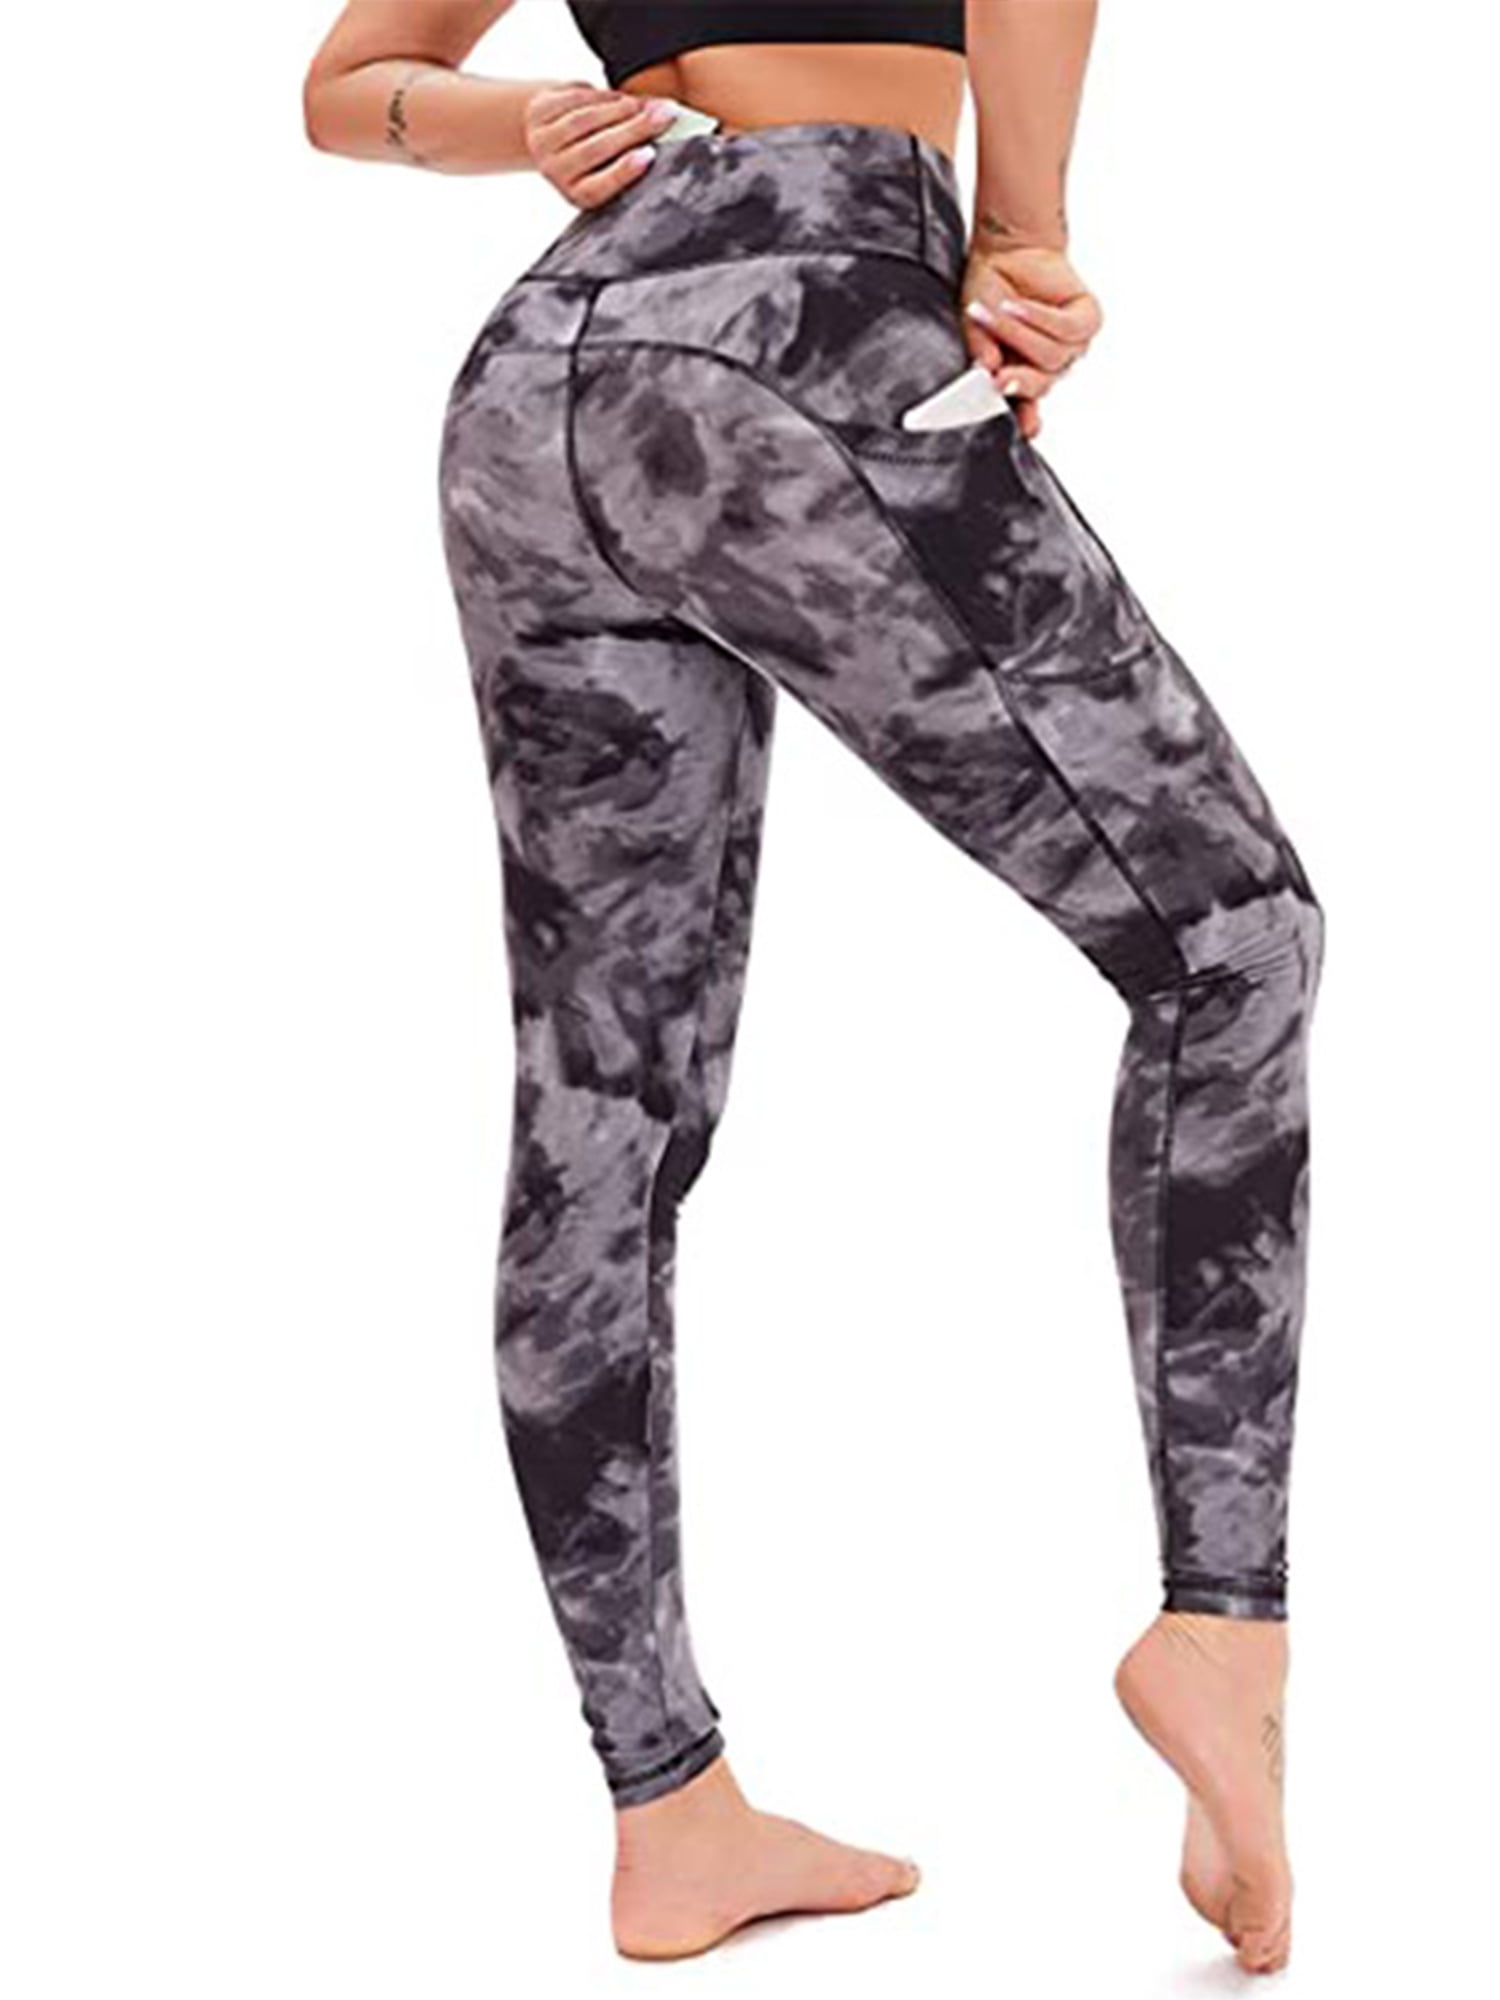 Sexy Dance - Sexy Dance Yoga Workout Pants for Womens Moisture-Wicking ...